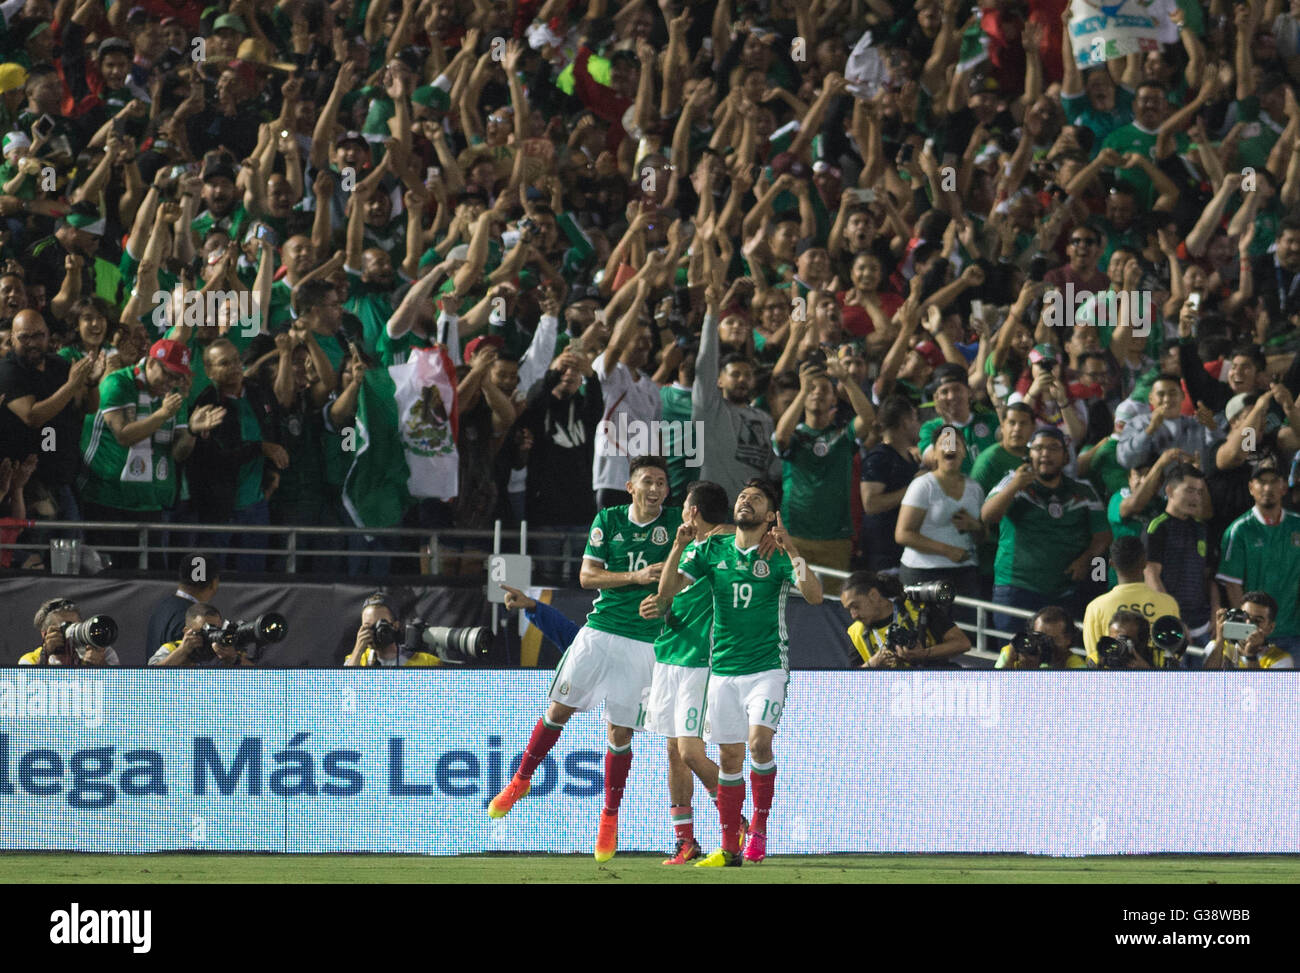 Pasadena, USA. 9th June, 2016. Mexico's Oribe Peralta (R) celebrates after scoring during the Copa America Centenario tournament Group C football match between Mexico and Jamaica in Pasadena, California, the United States, on June 9, 2016. Credit:  Yang Lei/Xinhua/Alamy Live News Stock Photo